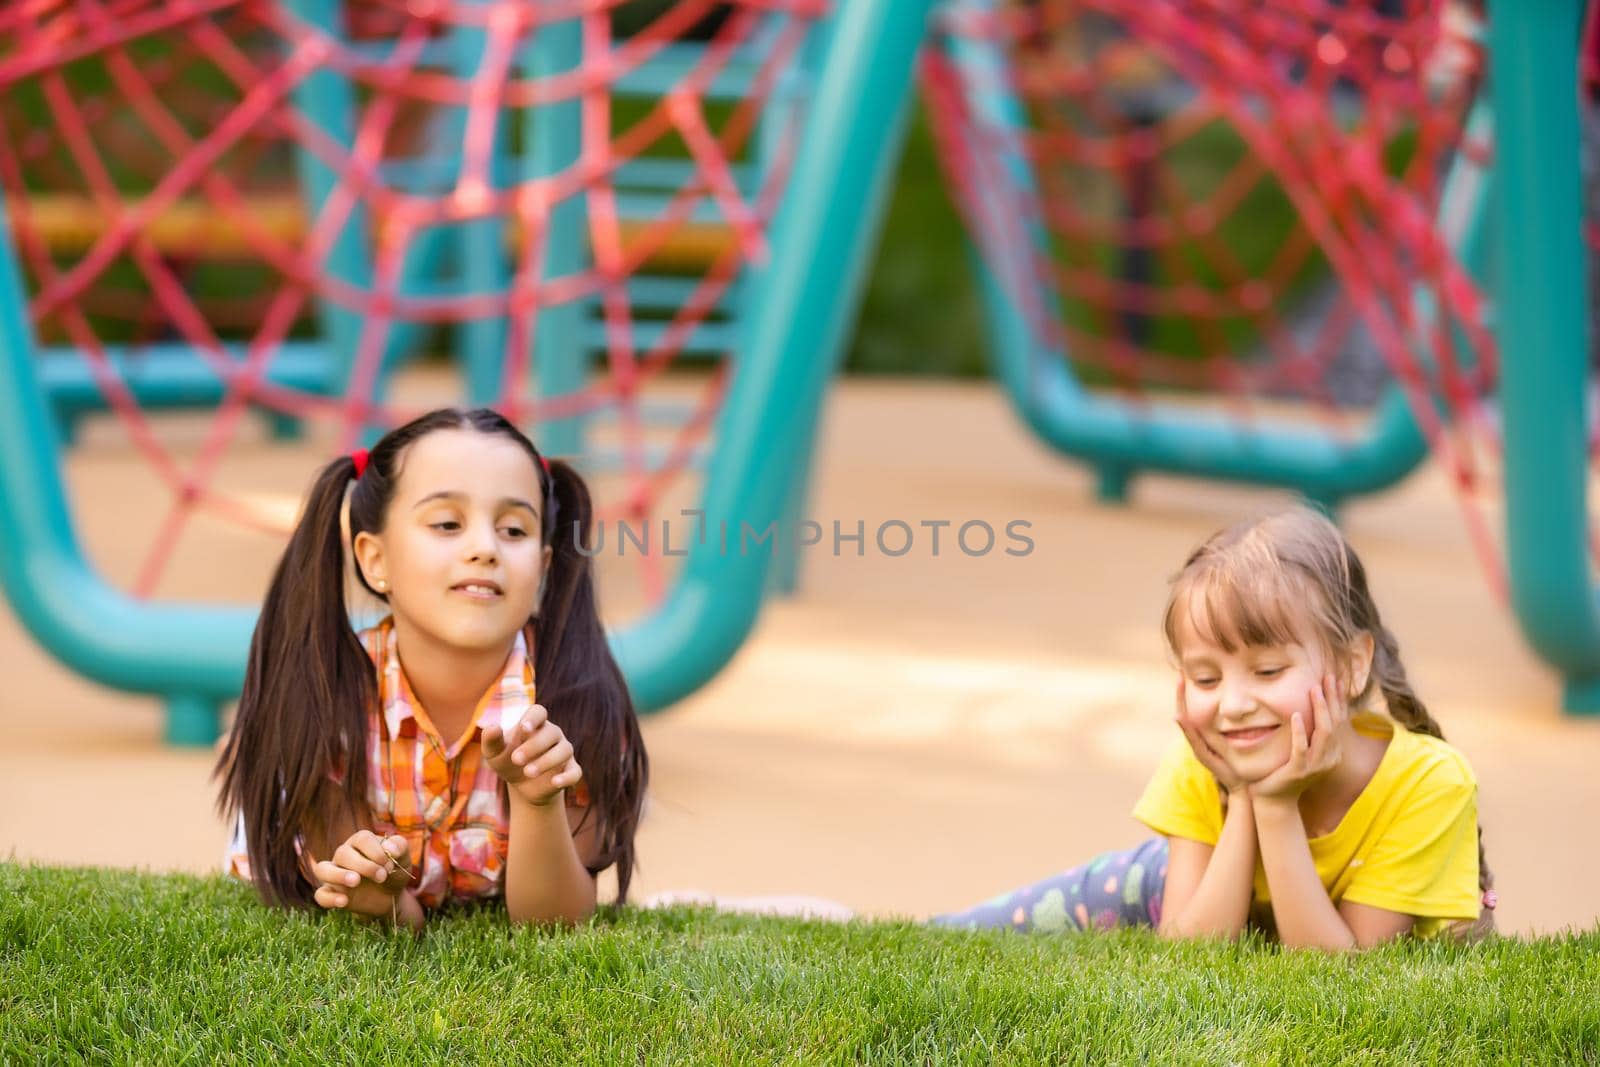 Young girls poking head through climbing rope activity using it as frame.